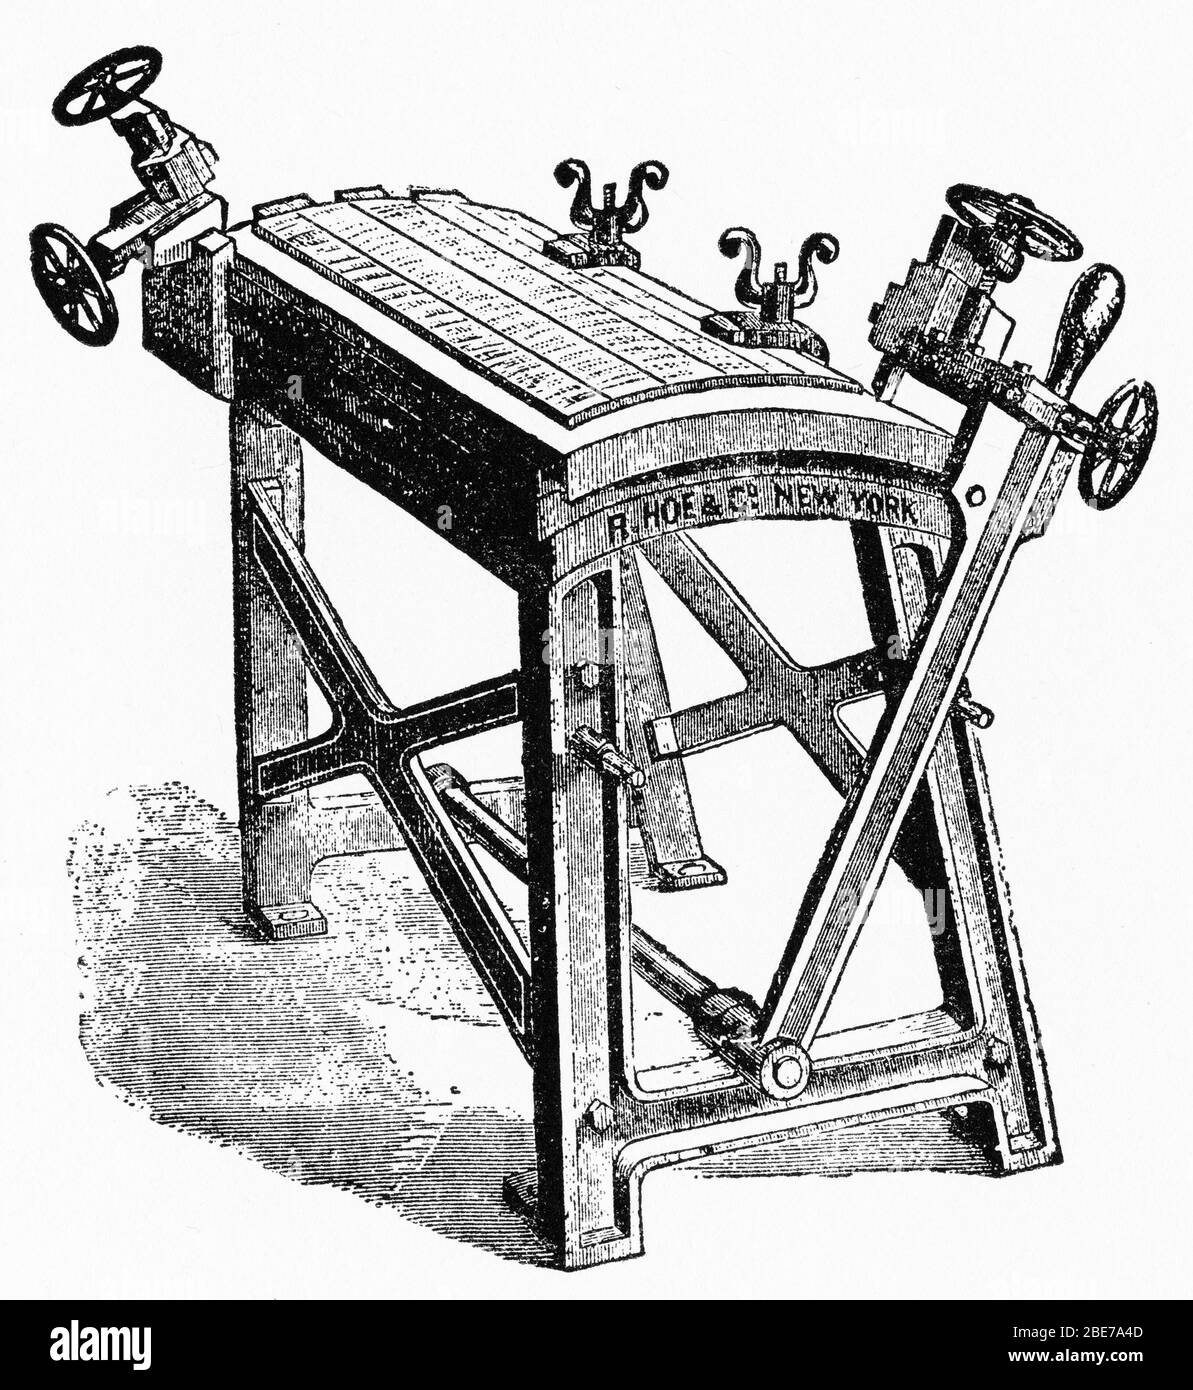 Engraving of a finishing saddle in a stereotype foundry, reproducing the plates of printed type used for making books Stock Photo